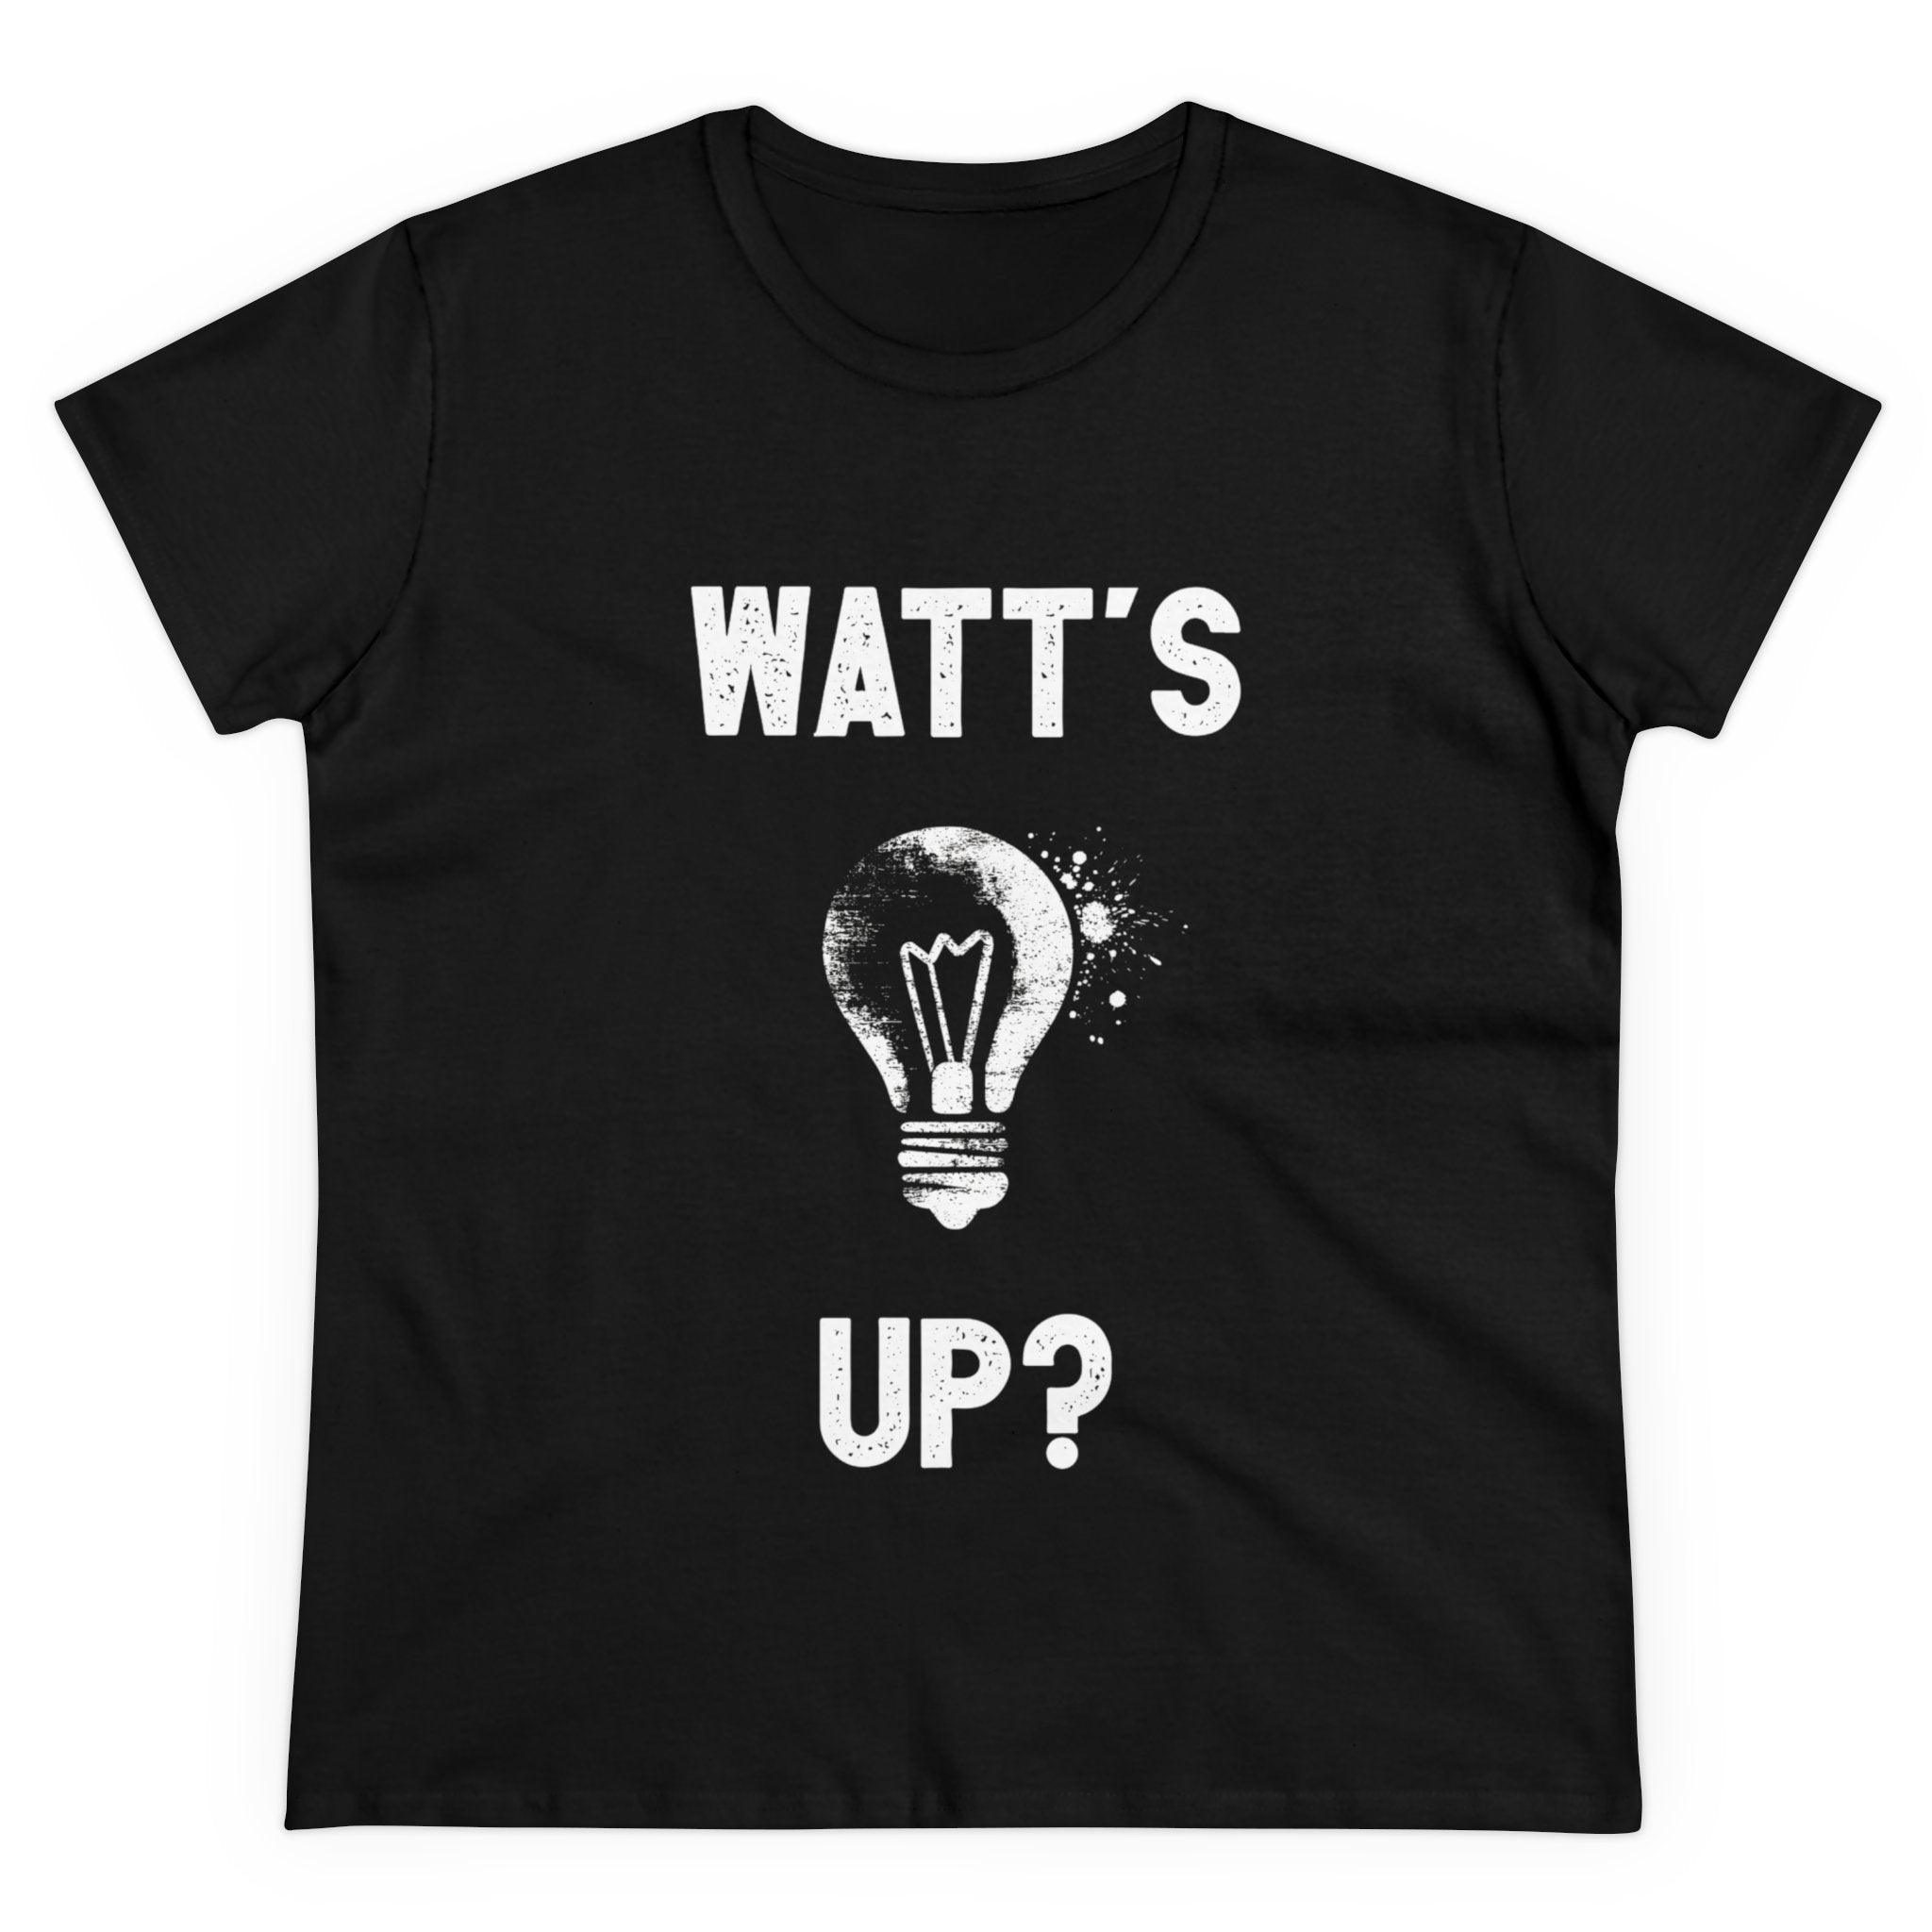 Watts Up - Women's Tee with the text "WATT'S UP?" and an image of a light bulb in distressed white lettering, made from light cotton fabric for ultimate comfort.